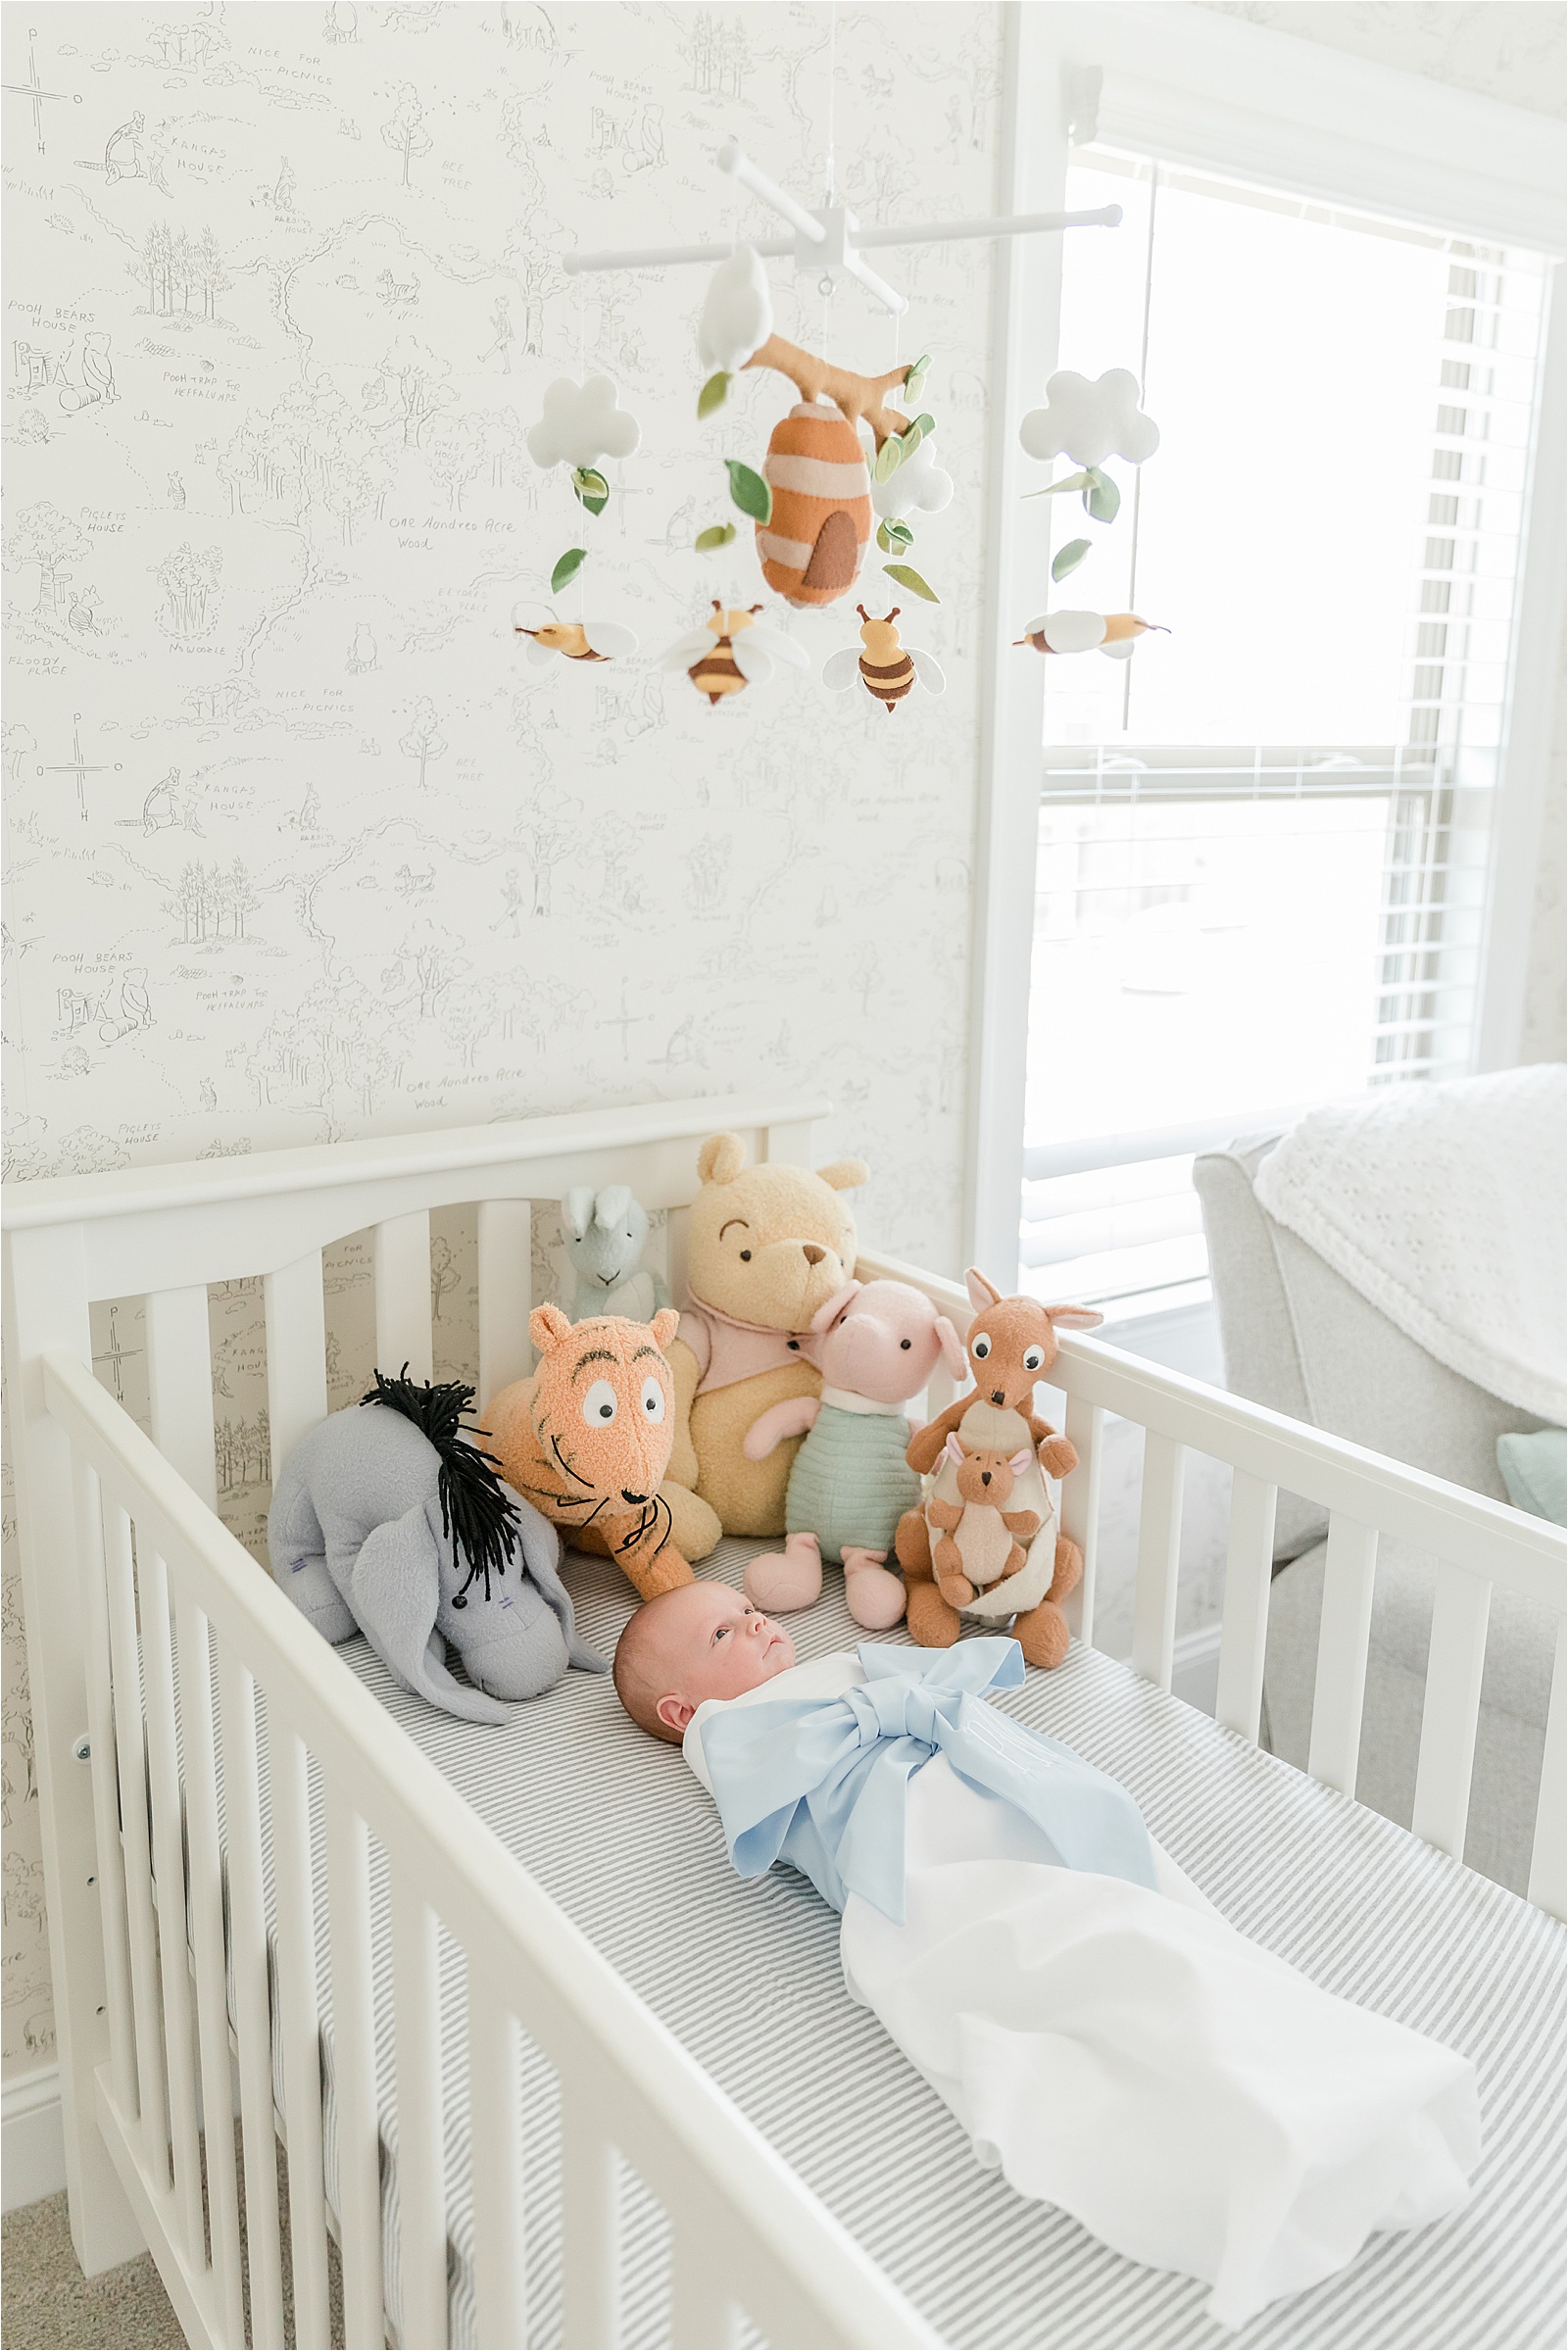 Newborn baby in crib below a honey bee mobile with vintage Winnie the Pooh stuffed animals